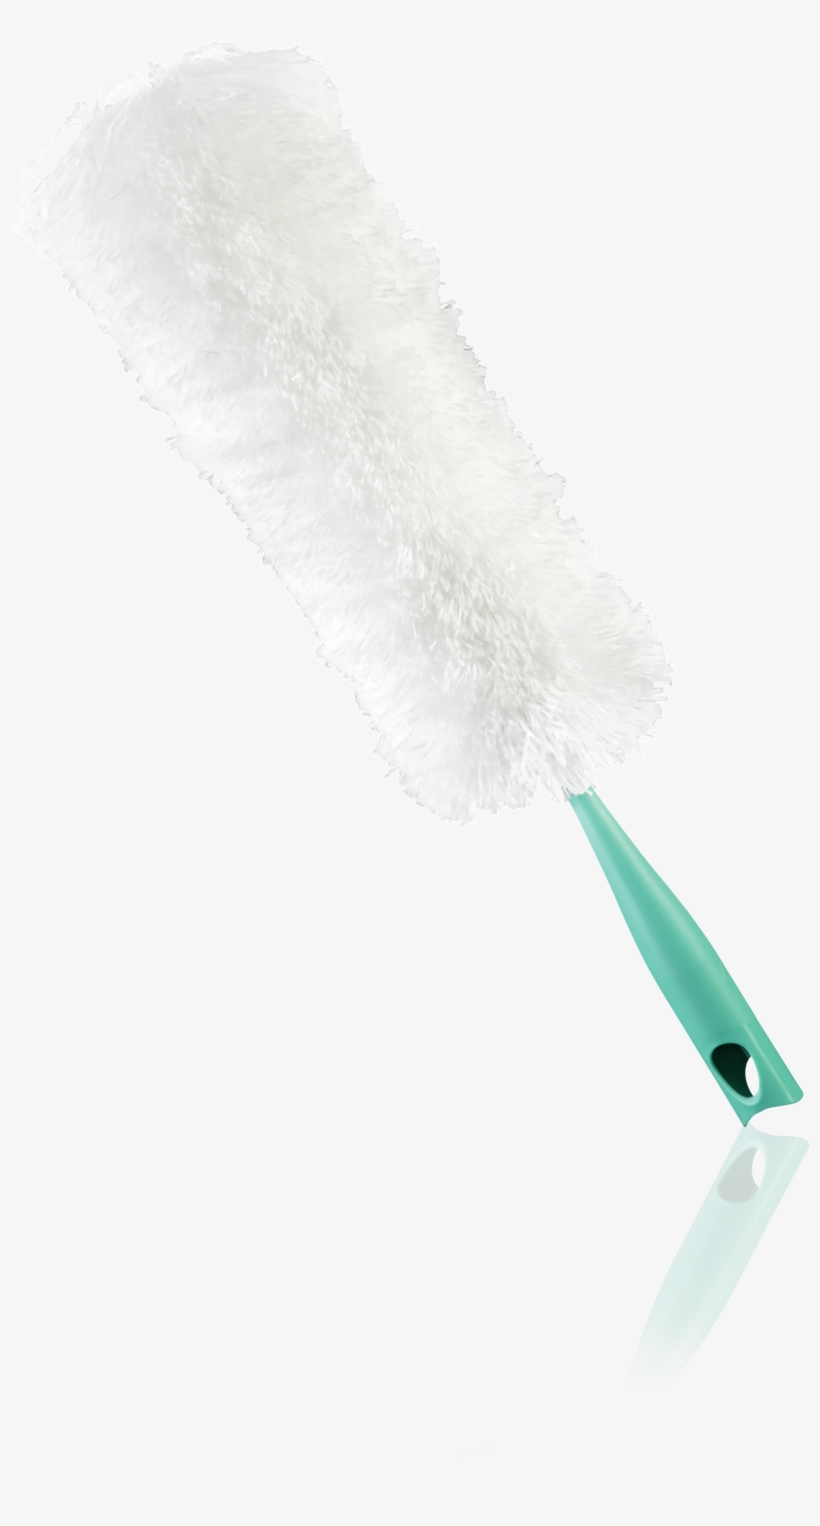 Feather Duster Xl - Leifheit Duster Xl Plastic Turquoise,white Cleaning, transparent png #7611366